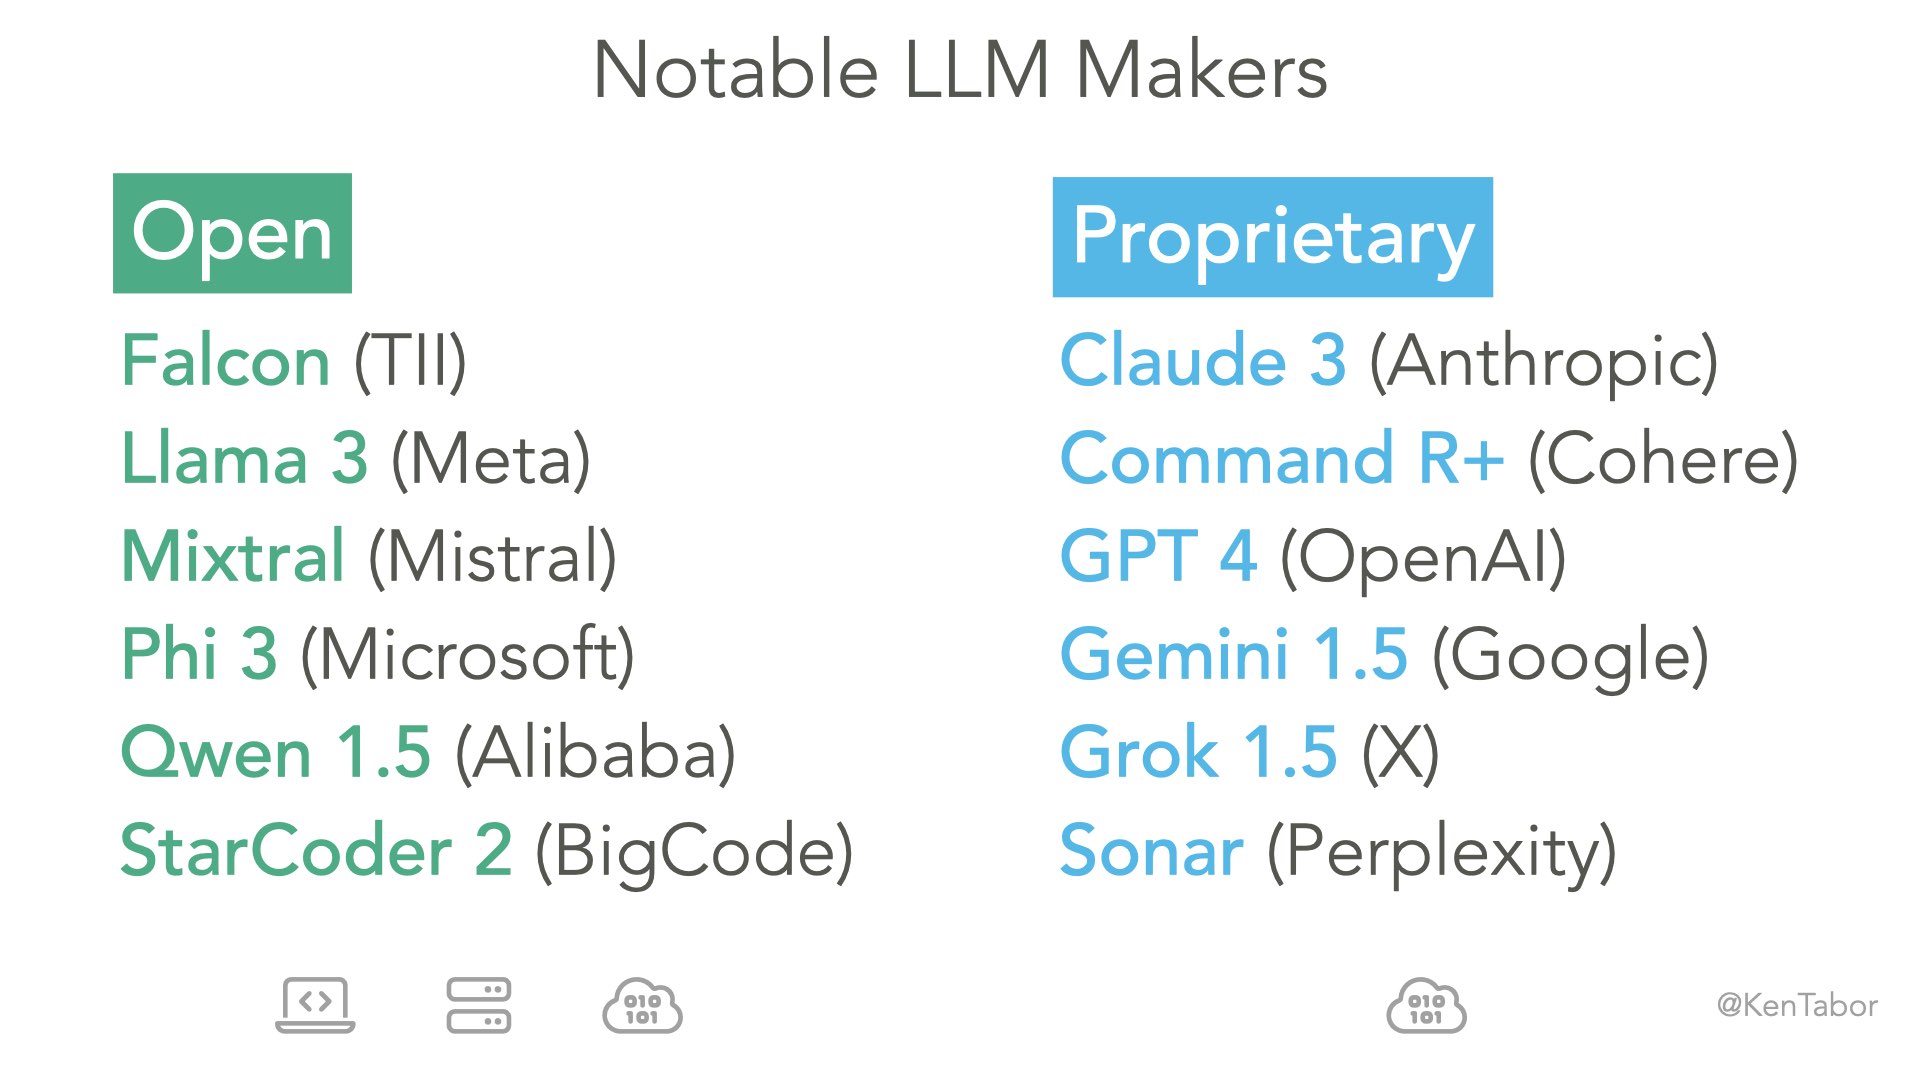 LLM names, versions, and makers